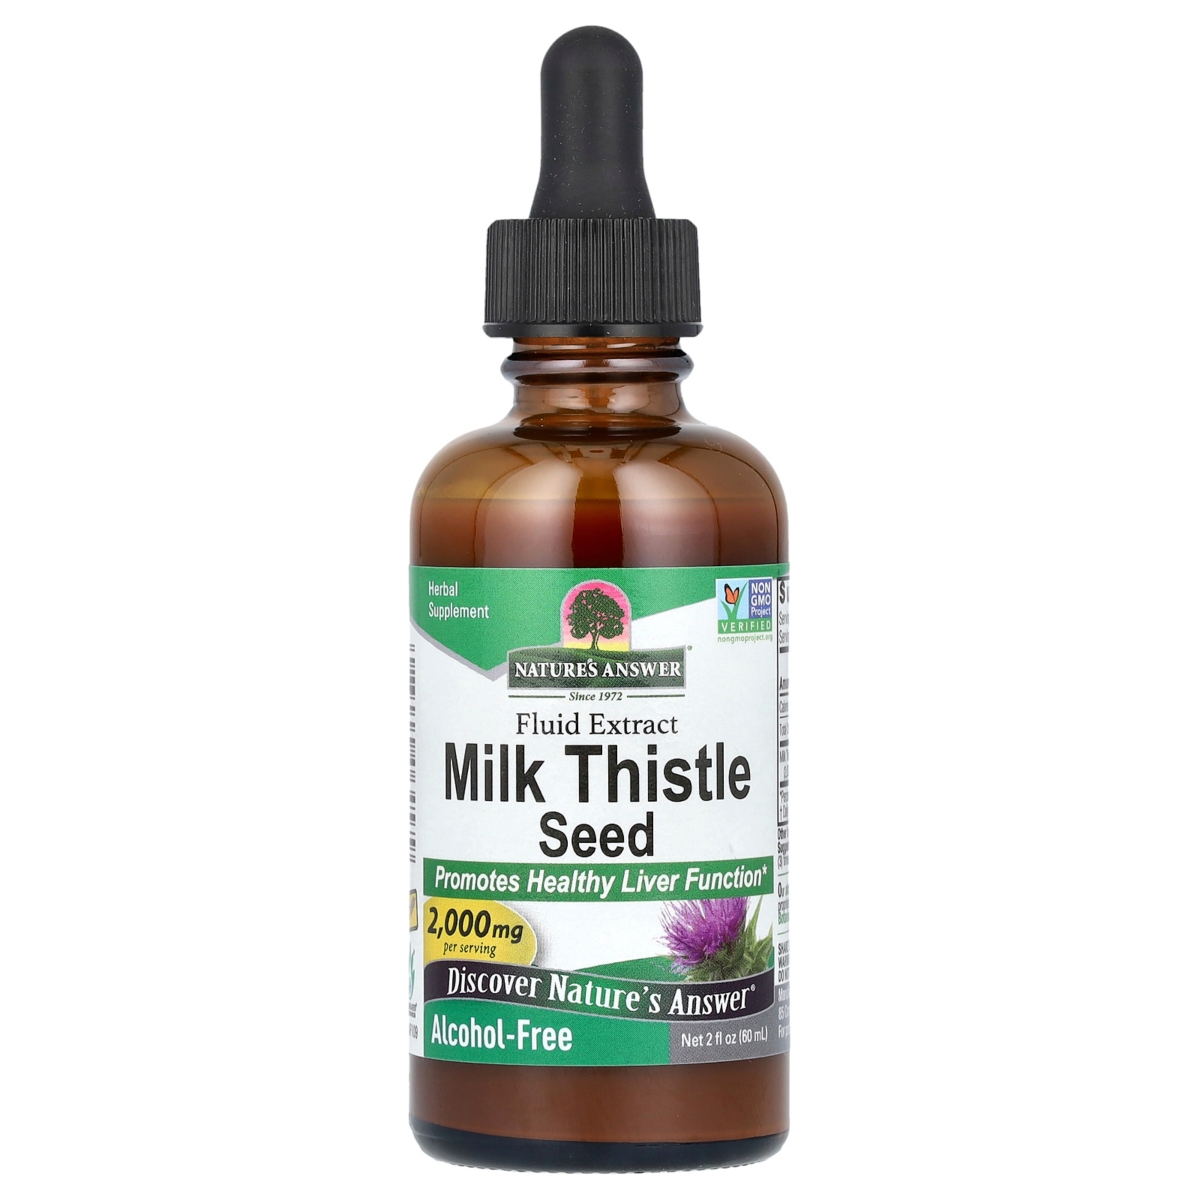 Milk Thistle Seed Fluid Extract Alcohol-Free 2 000 mg - 2 fl oz (60 ml) - Assorted Pre-pack (See Table